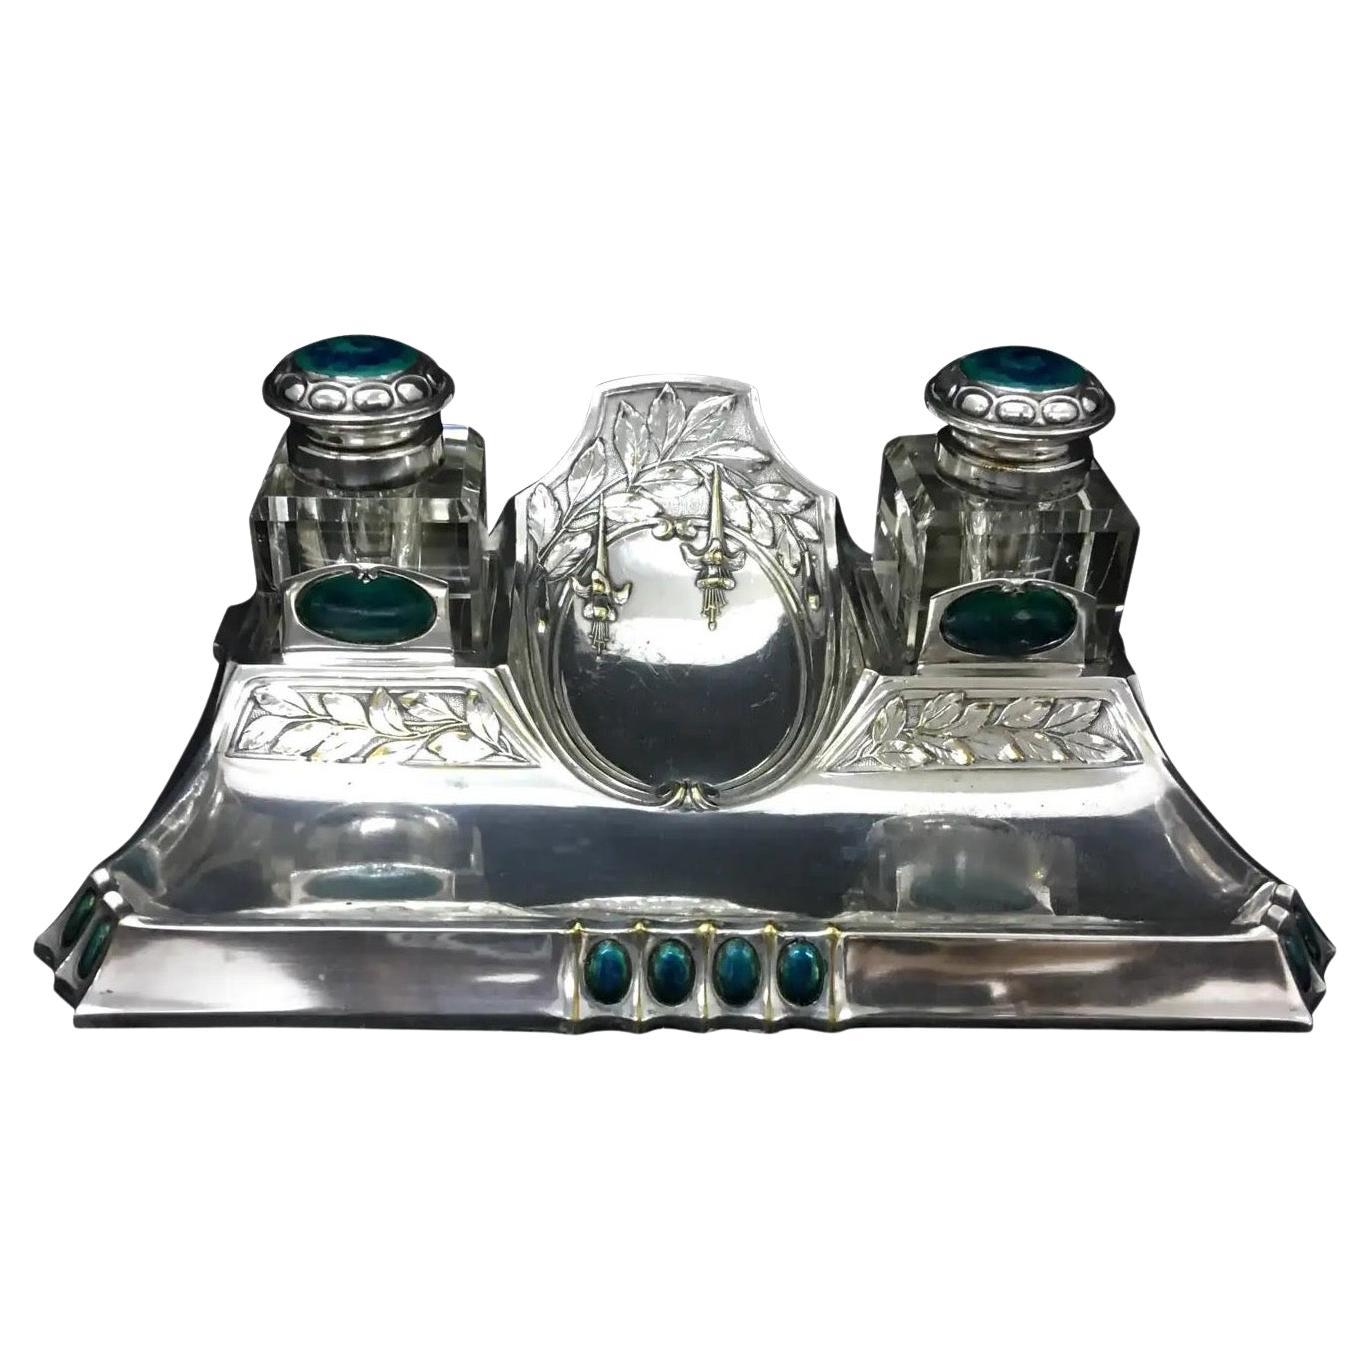 1900, High Quality Art Nouveau Silver Plated and Enamels German Inkwell